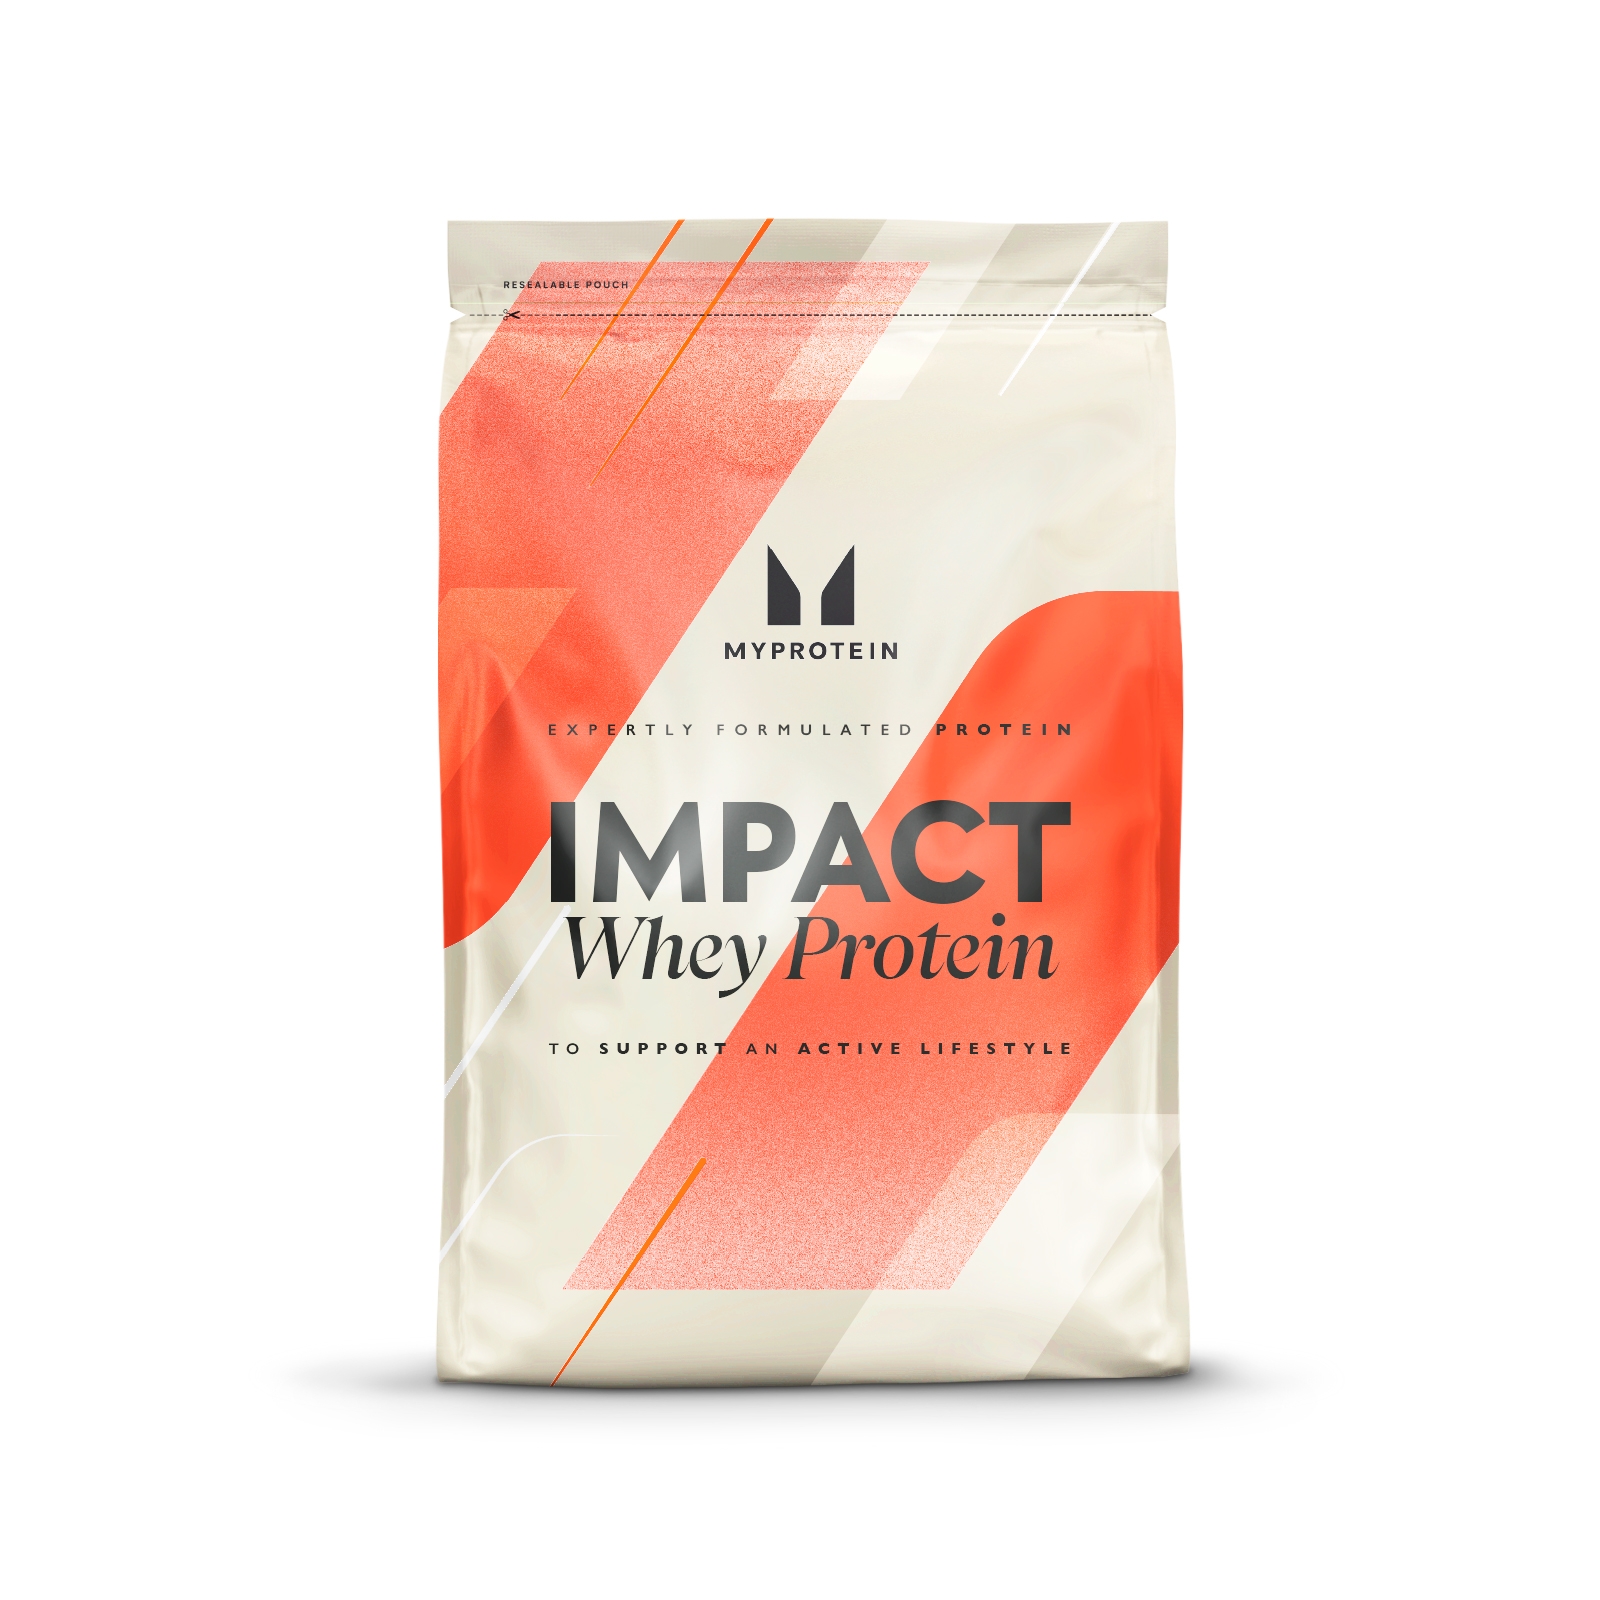 Image of Myprotein Impact Whey Protein - 2x25kg - Chocolate Brownie 14302231 PT21